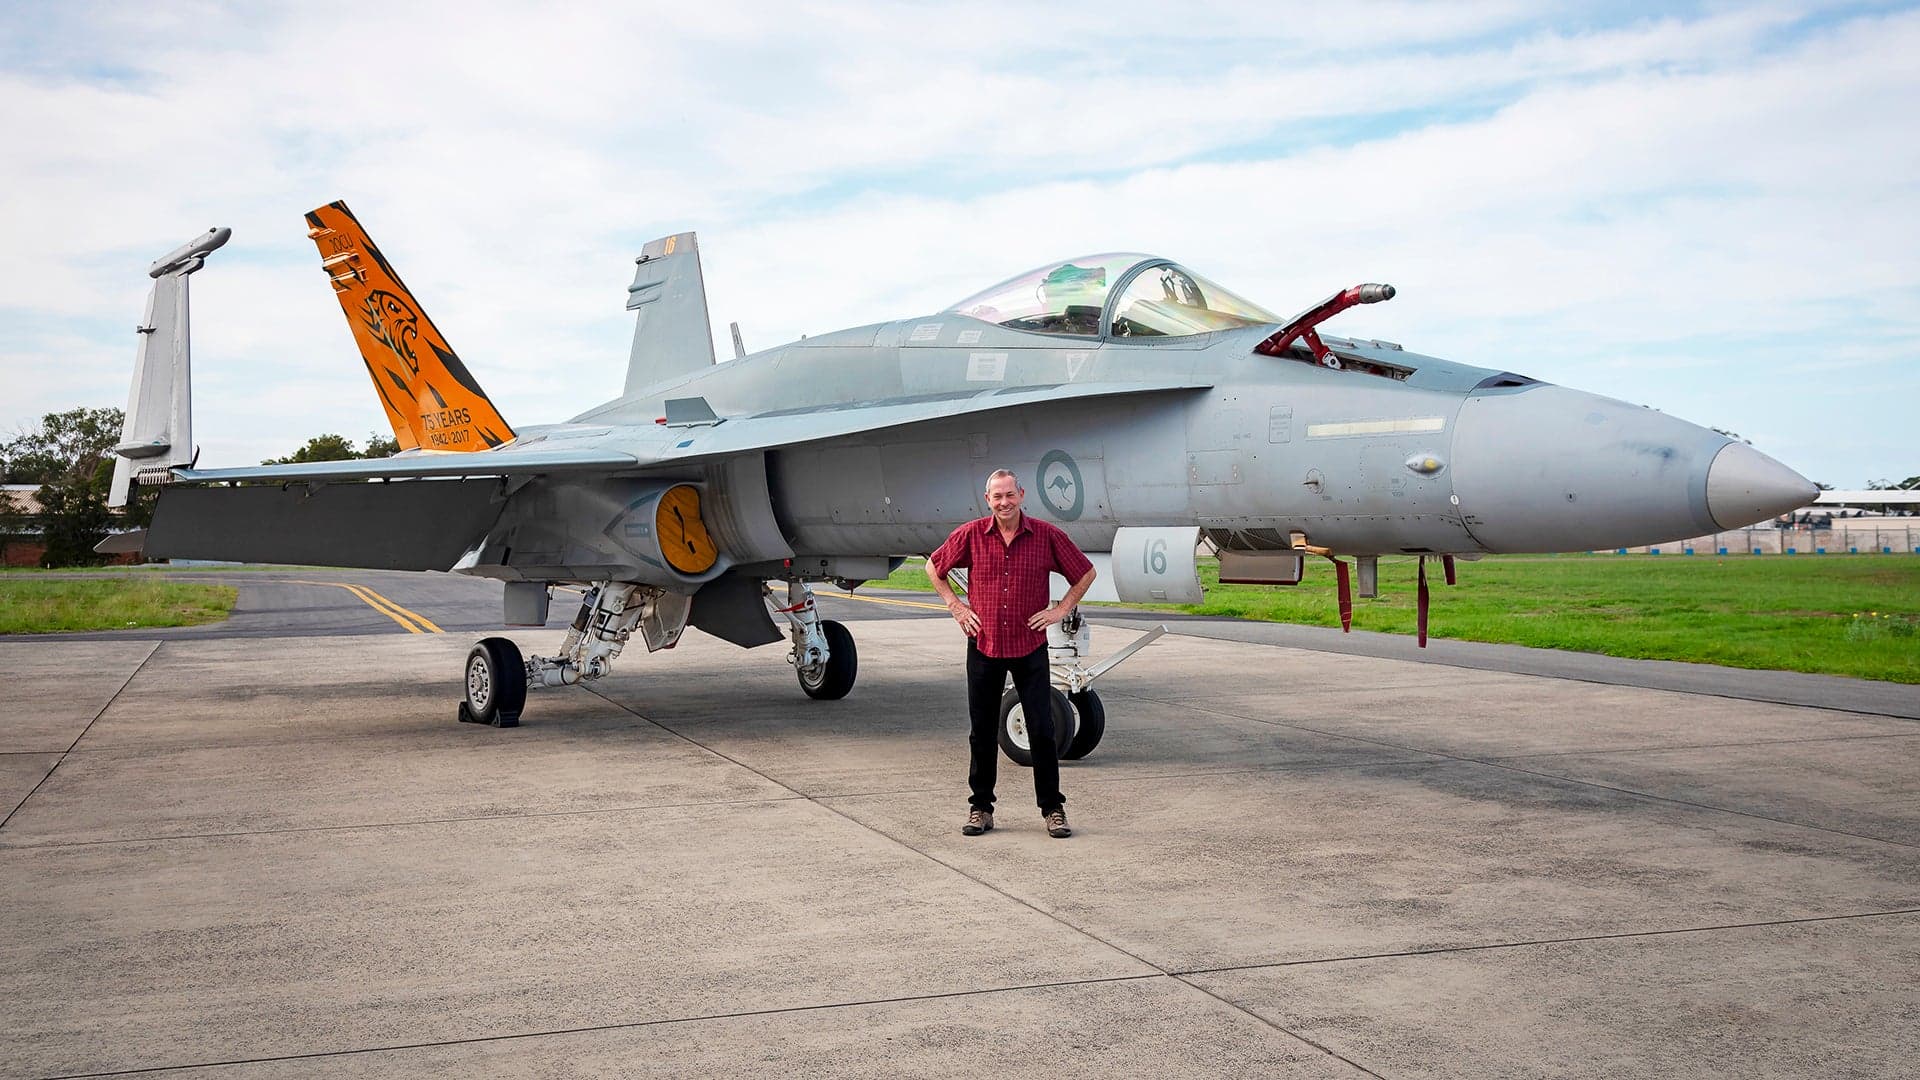 This Man Owns The World’s Most Advanced Private Air Force After Buying 46 F/A-18 Hornets